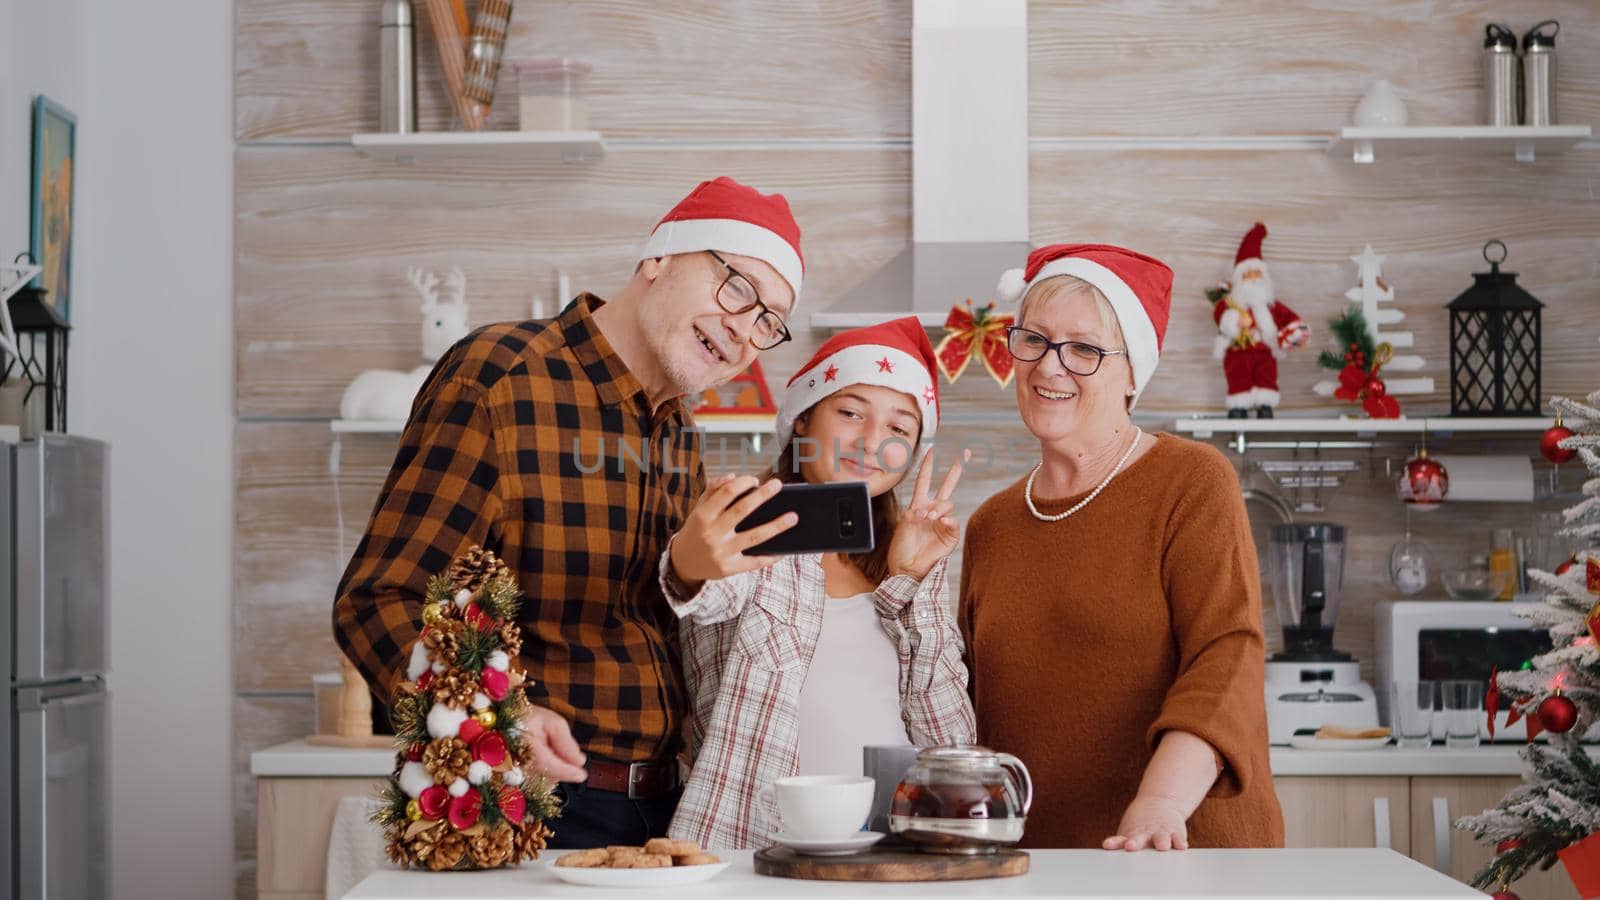 Happy grandparents standing at table in xmas decorated kitchen taking selfie using smartpgone during winter season. Family wearing santa hat making funny expressions enjoying christmas holiday